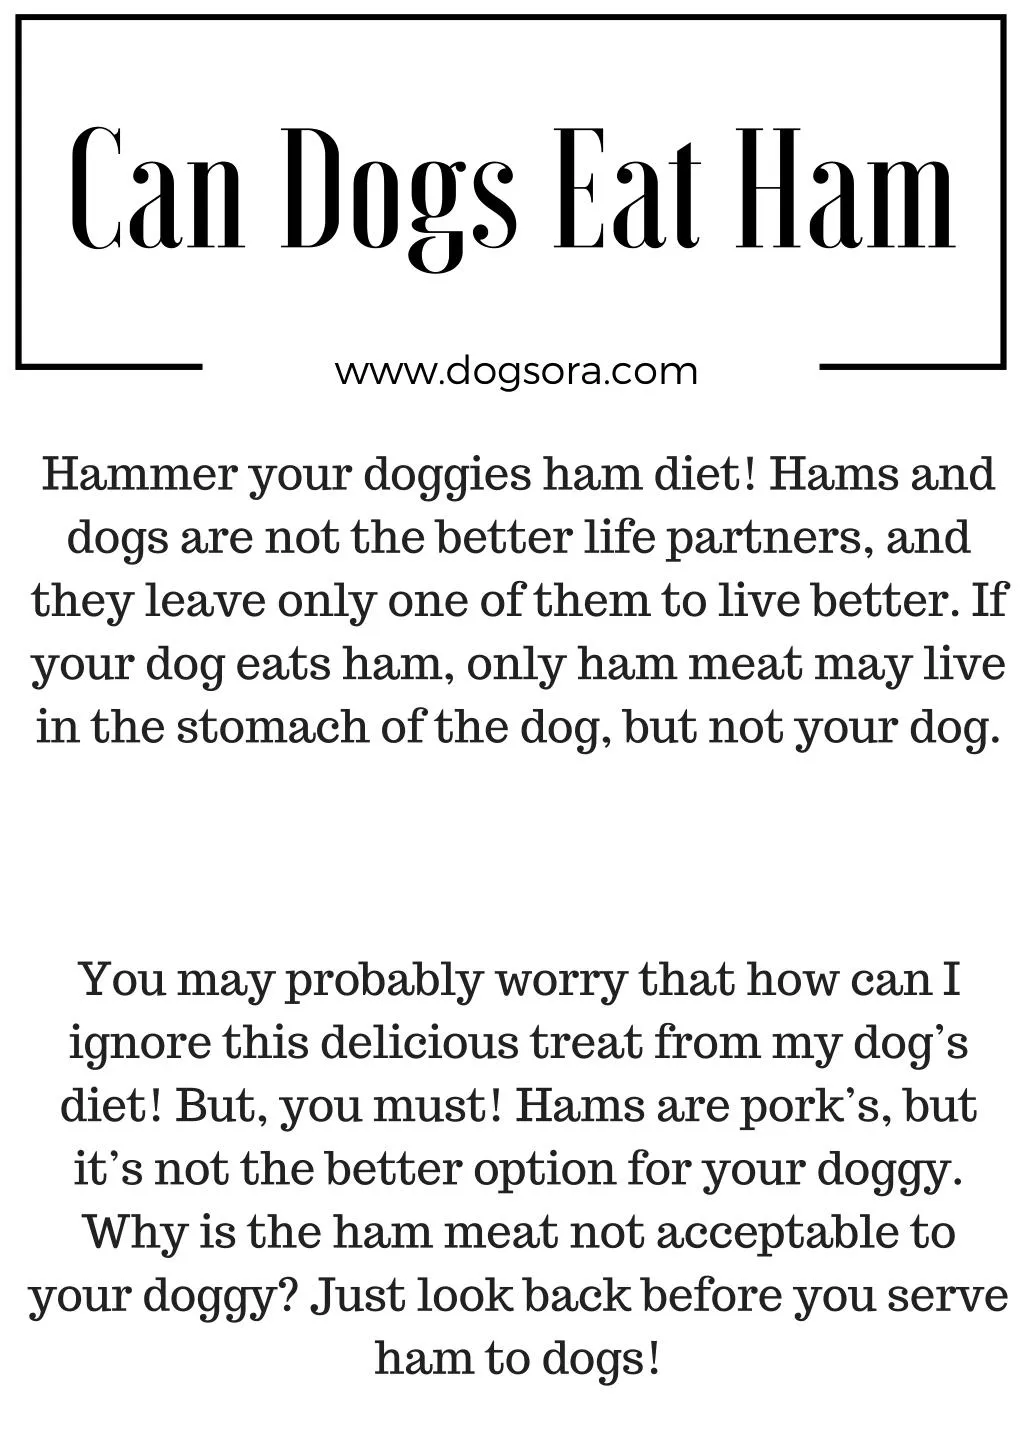 can dogs ea t ham